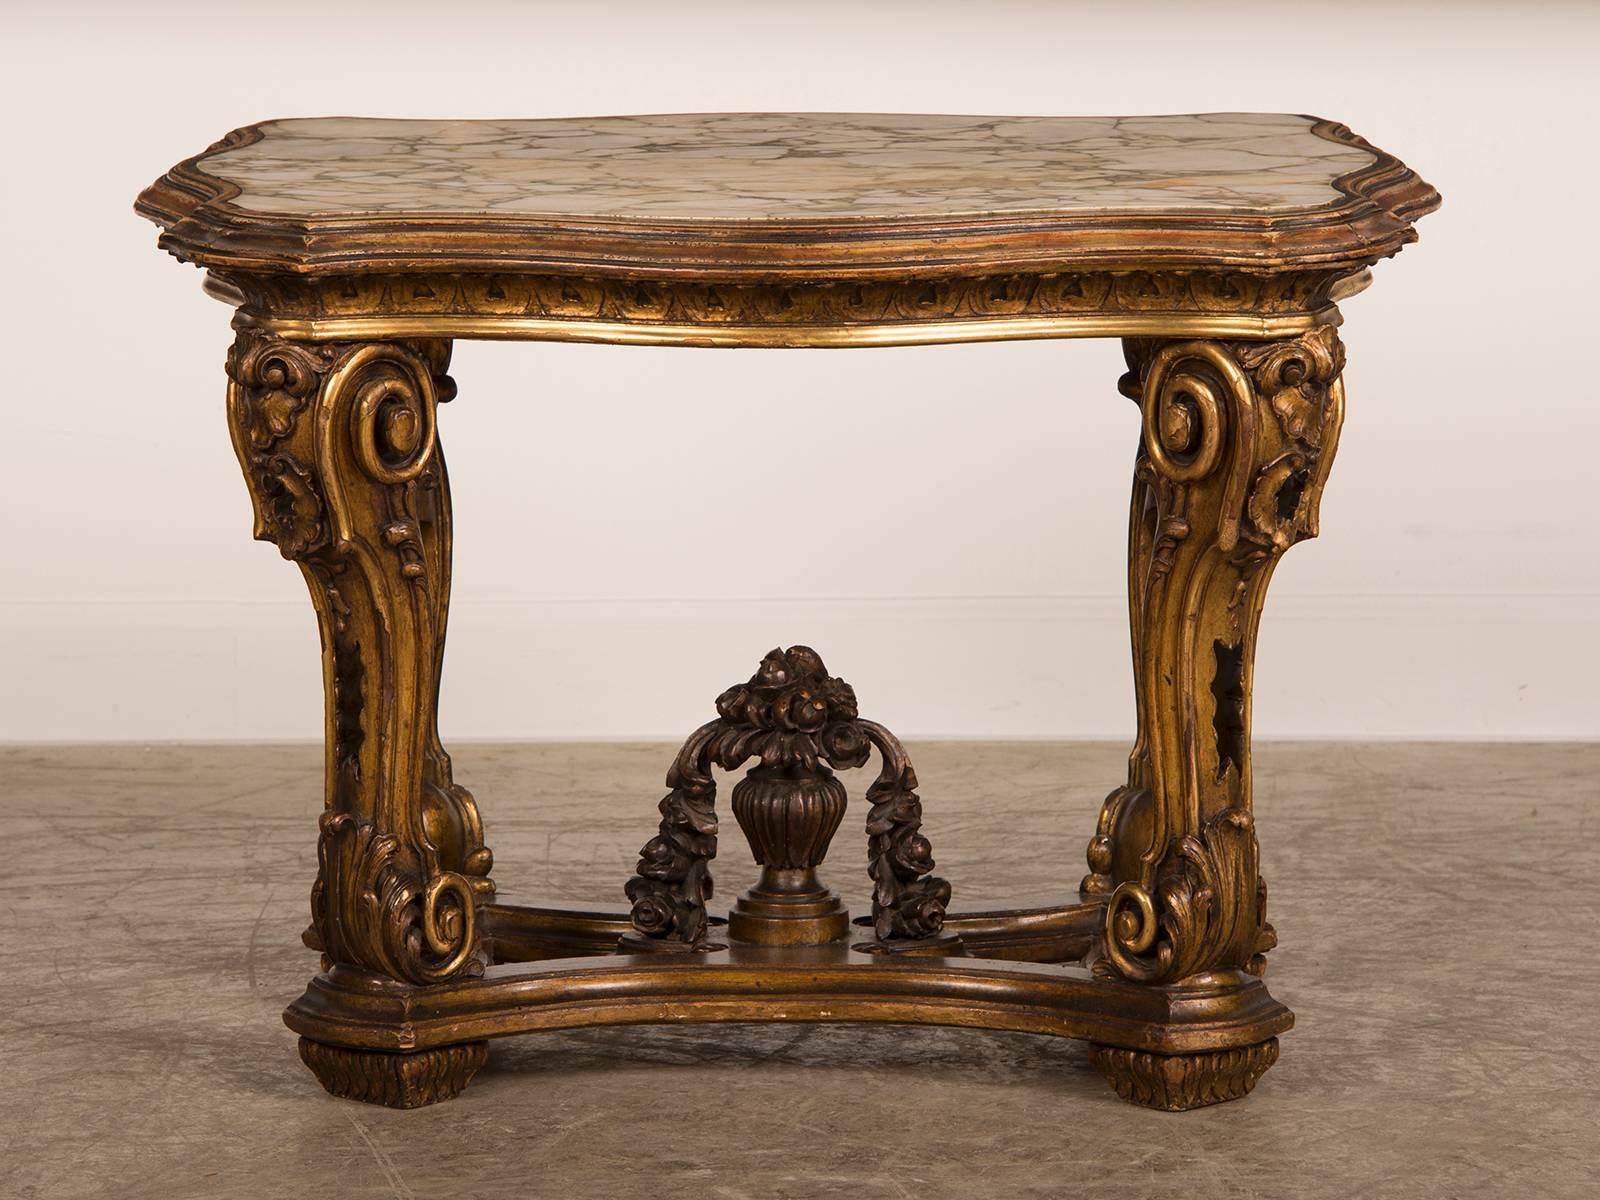 Carved Antique Italian Gilded Wood Table from the Belle Epoque Period, circa 1890